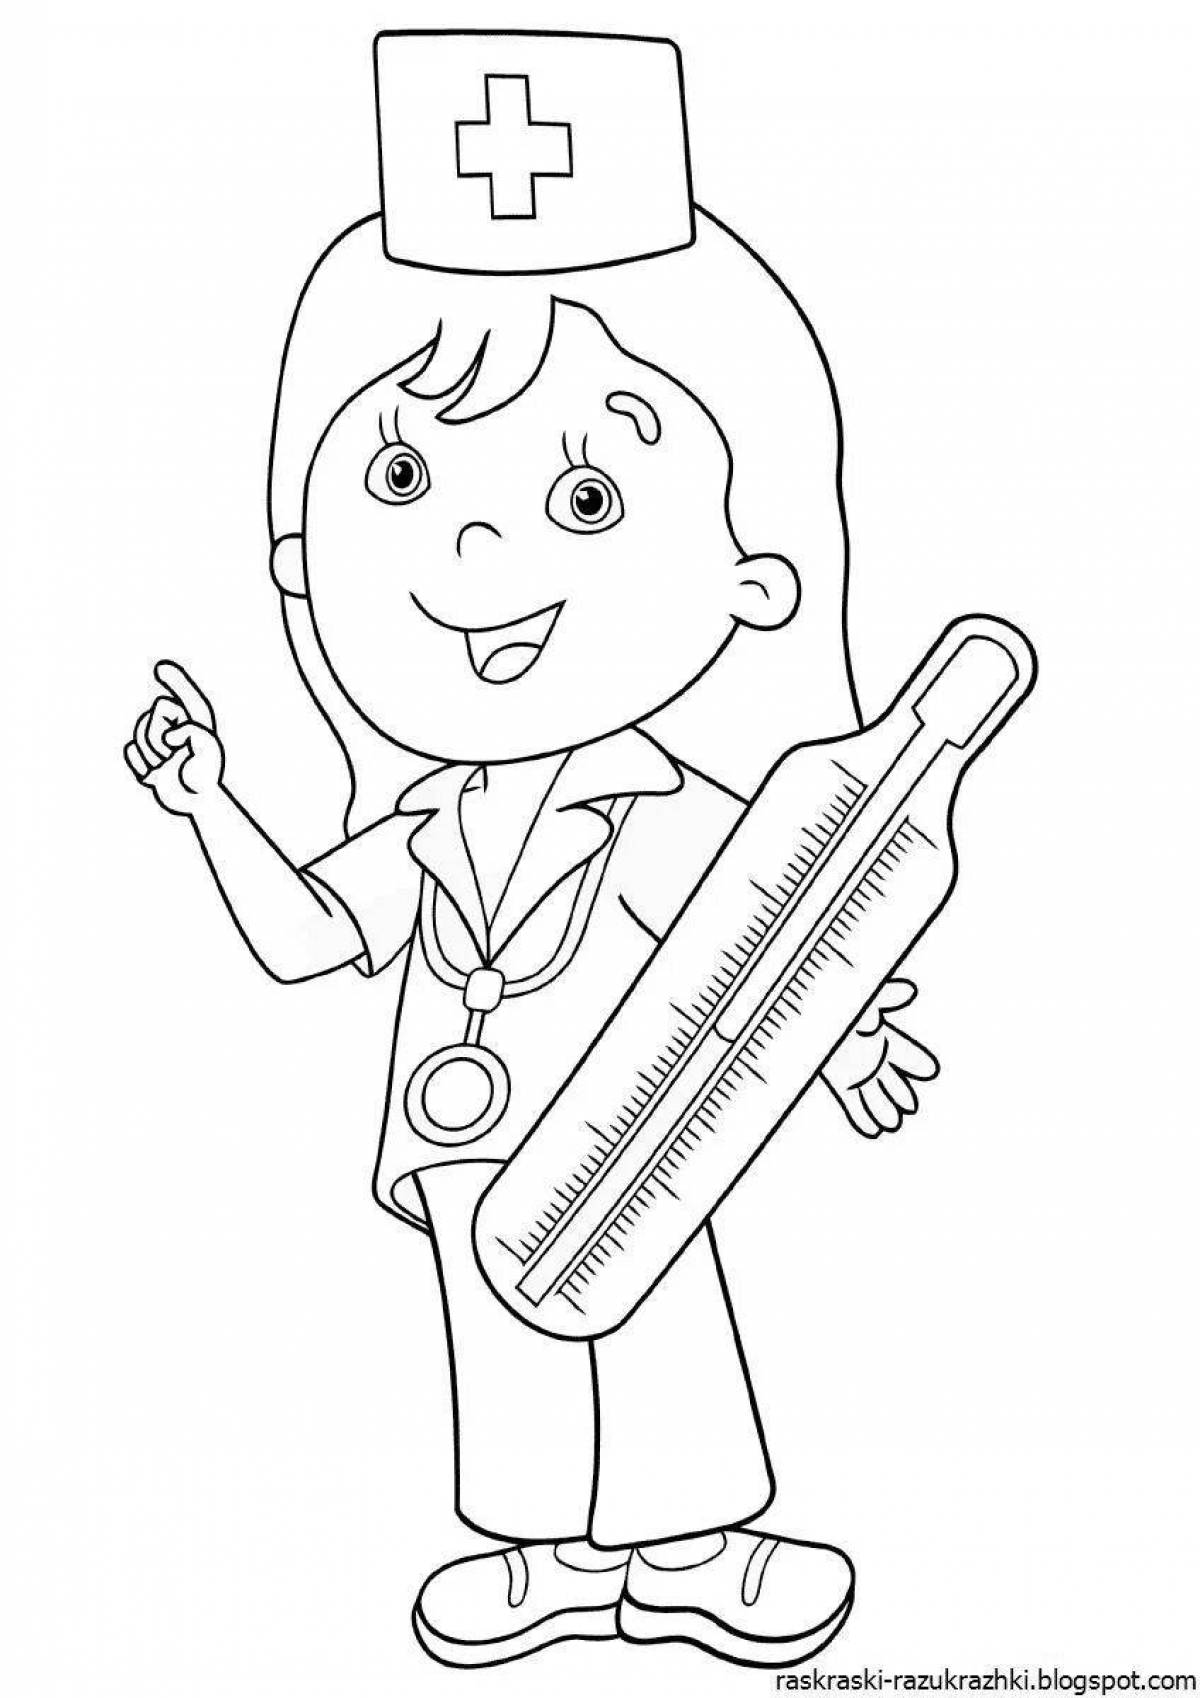 Bright doctor coloring page